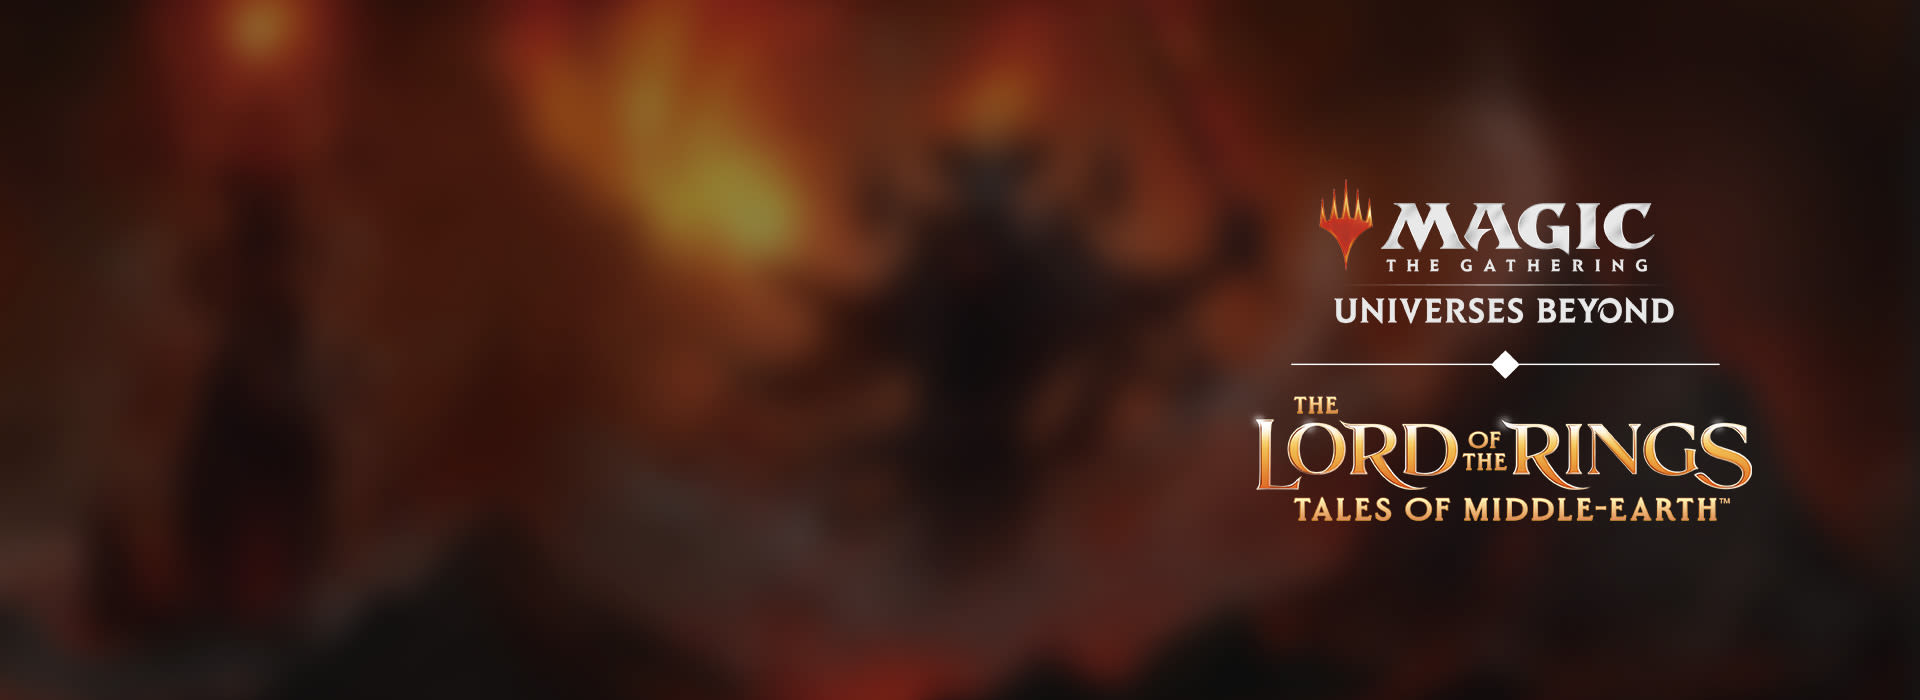 Dates & Details for The Lord of the Rings: Tales of Middle-earth